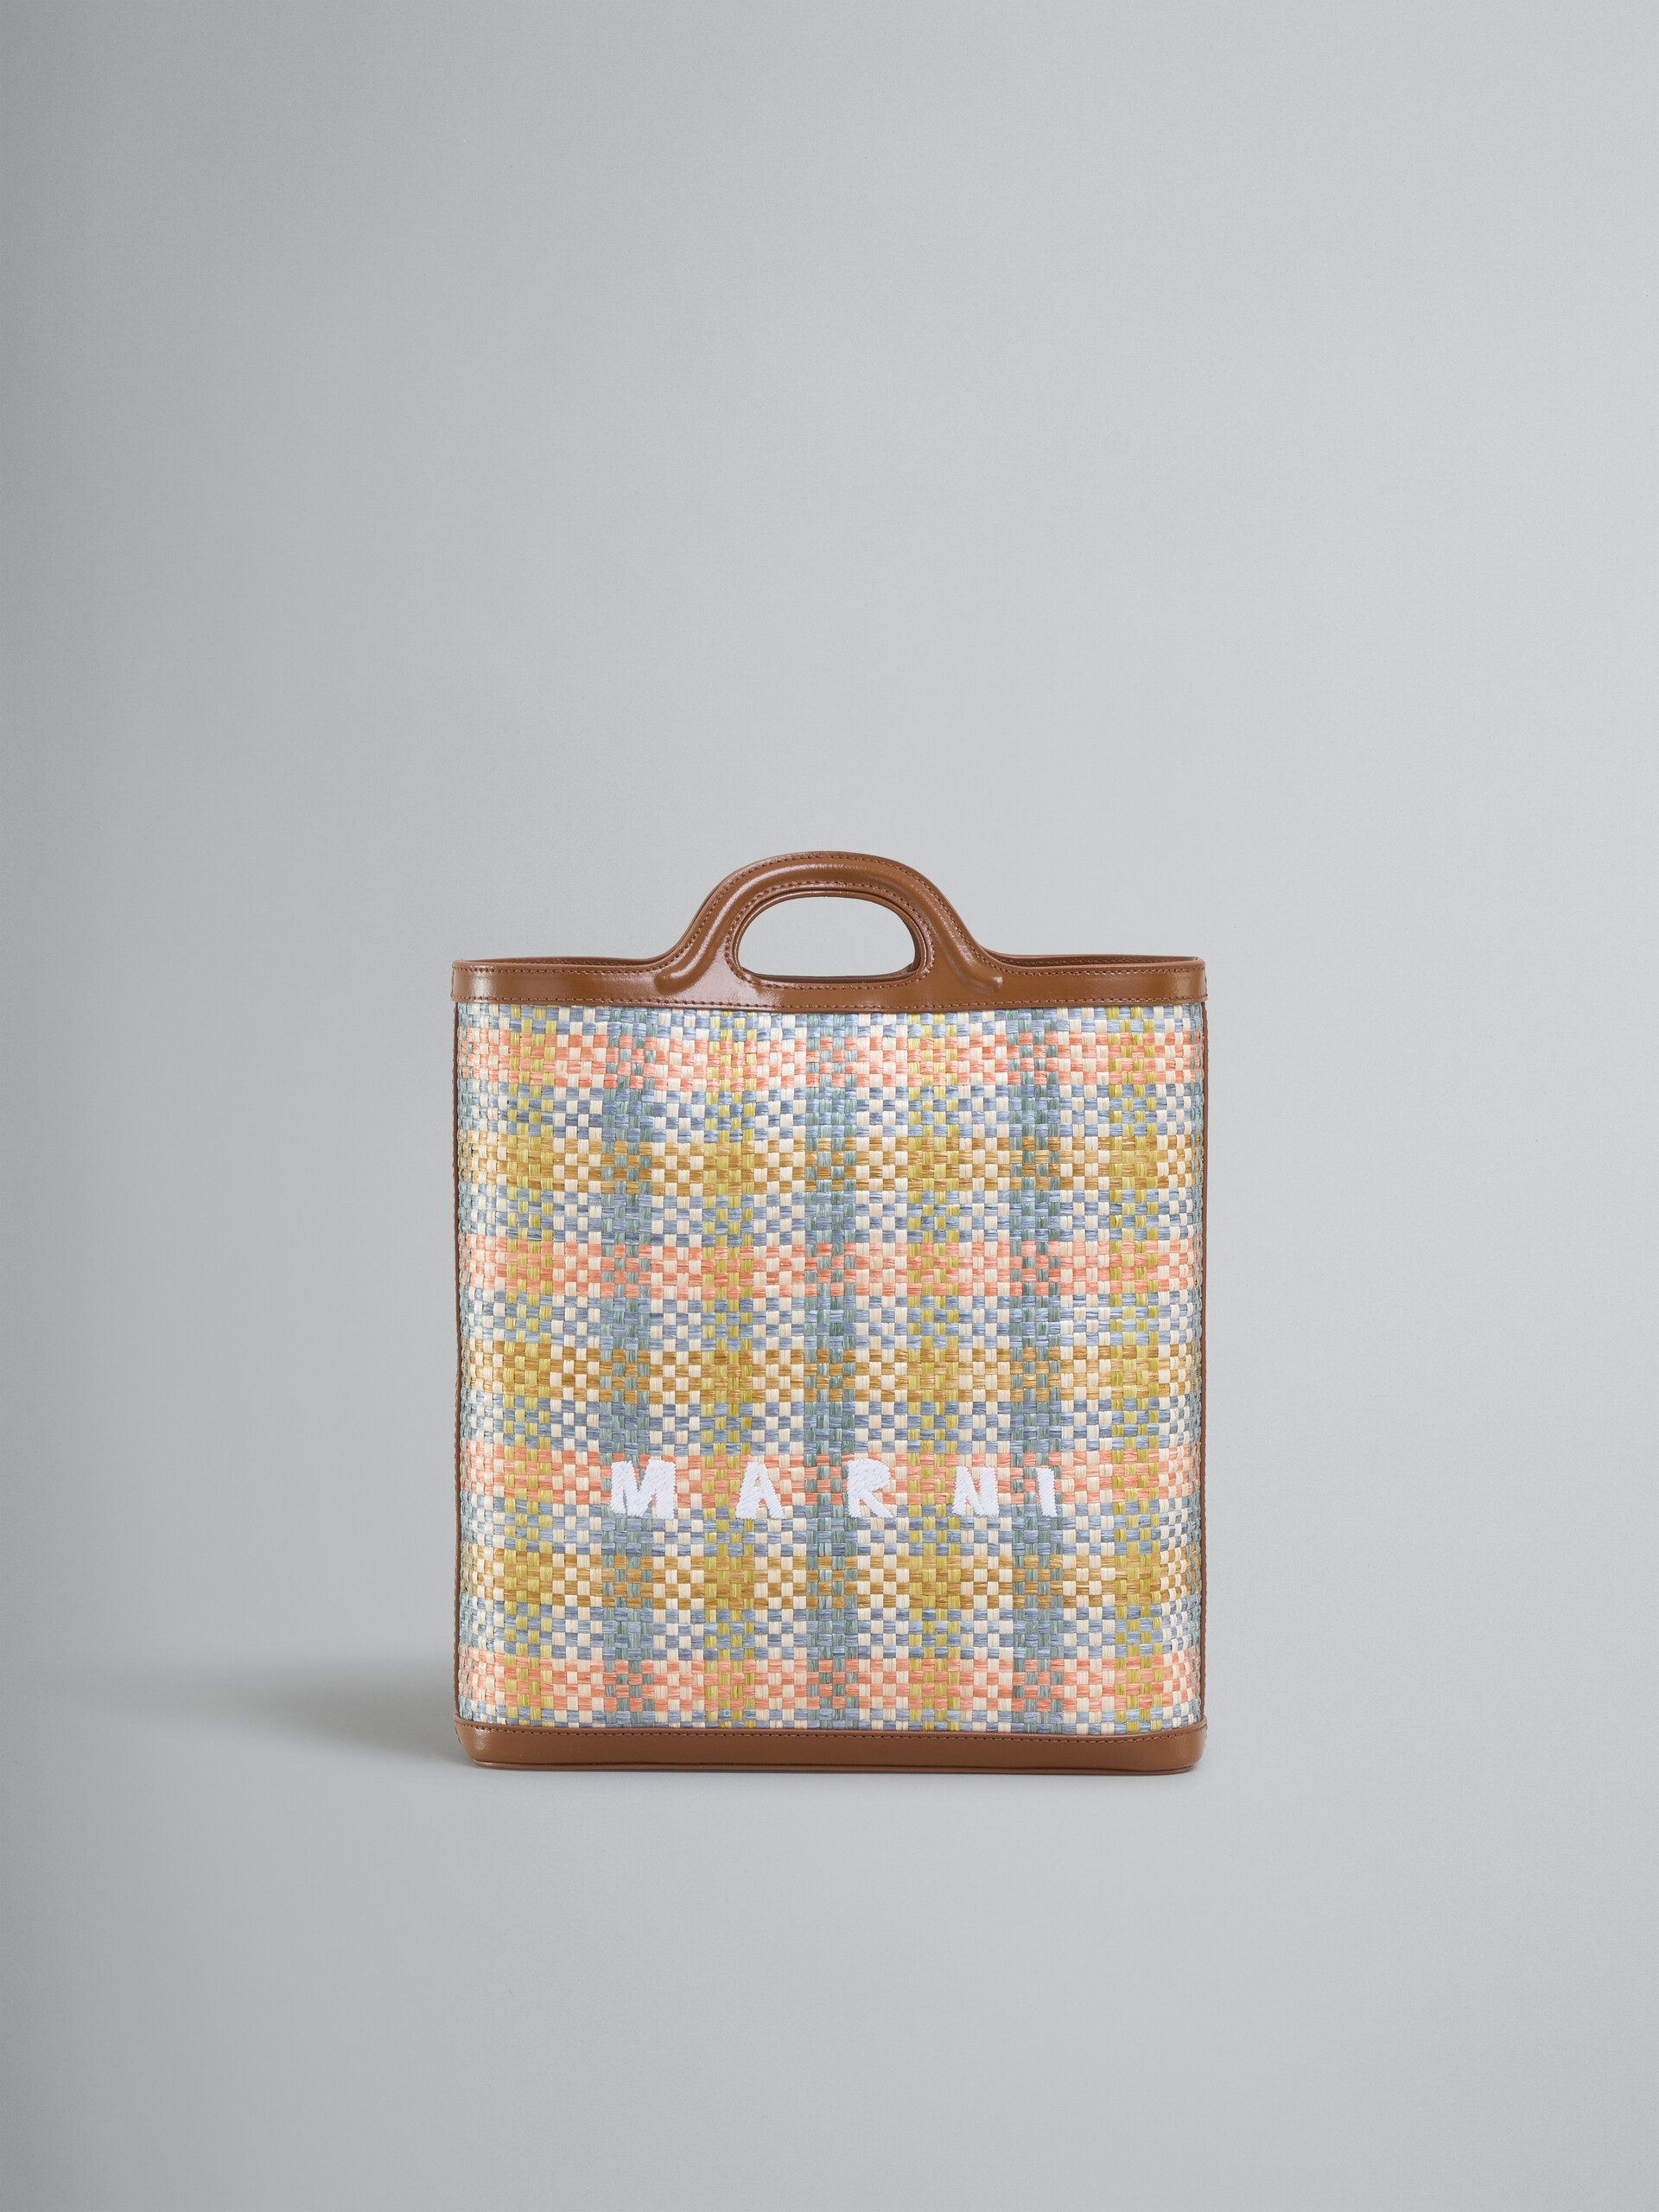 Tropicalia crossbody bag in brown leather and checked raffia-effect fabric - Shoulder Bags - Image 1